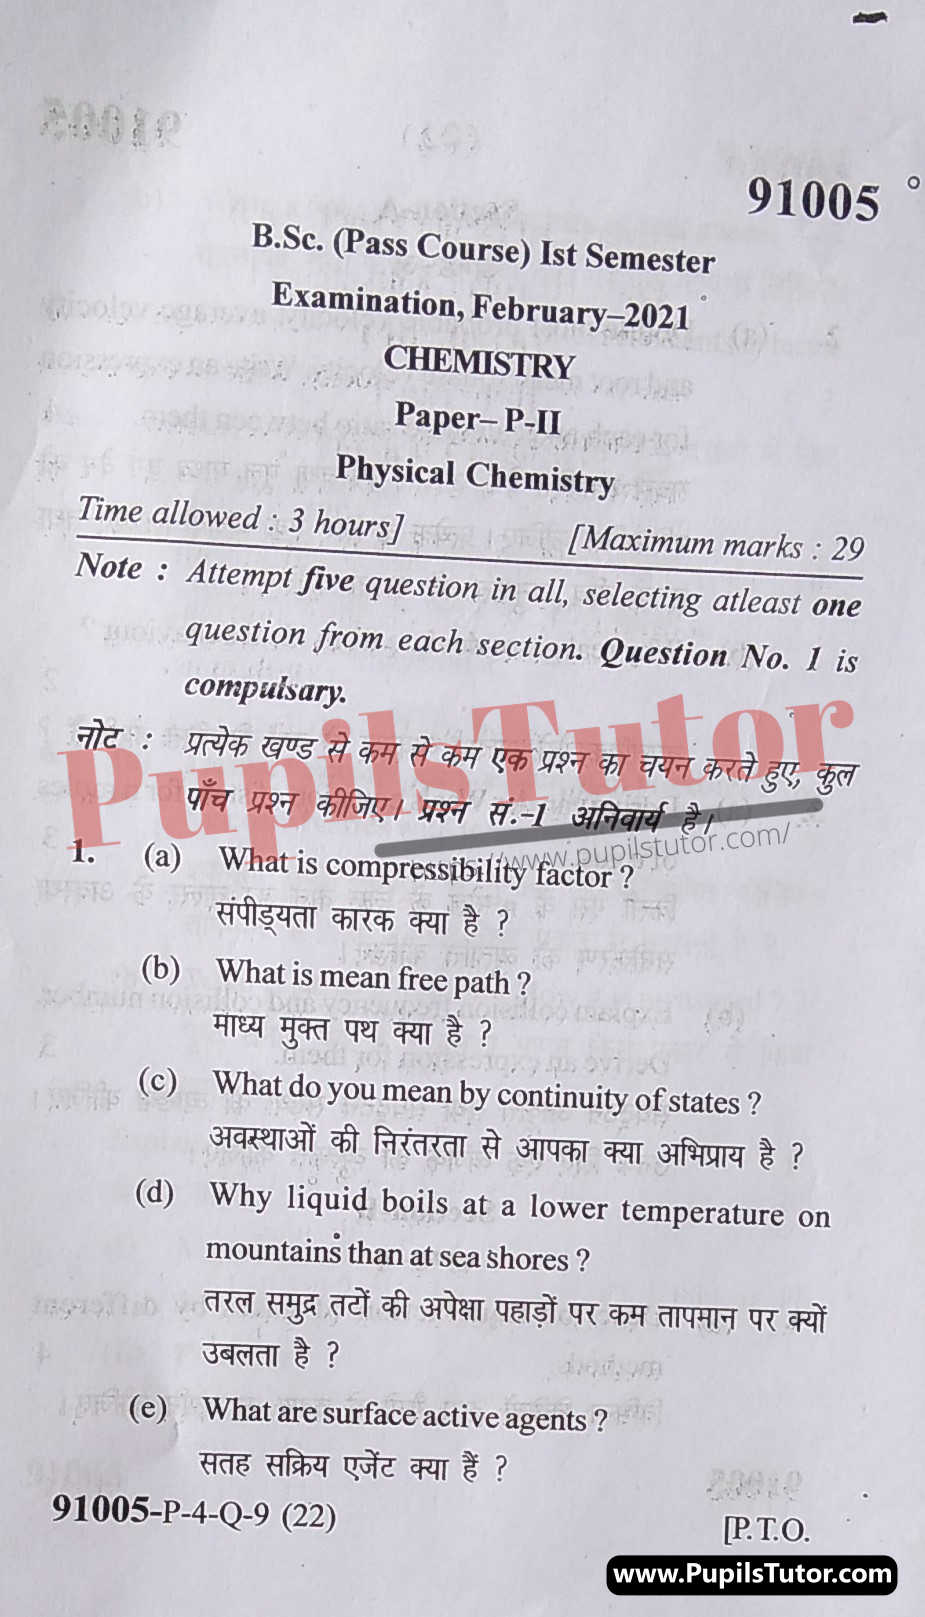 MDU (Maharshi Dayanand University, Rohtak Haryana) BSc Chemistry Pass Course First Semester Previous Year Physical Chemistry Question Paper For February, 2021 Exam (Question Paper Page 1) - pupilstutor.com